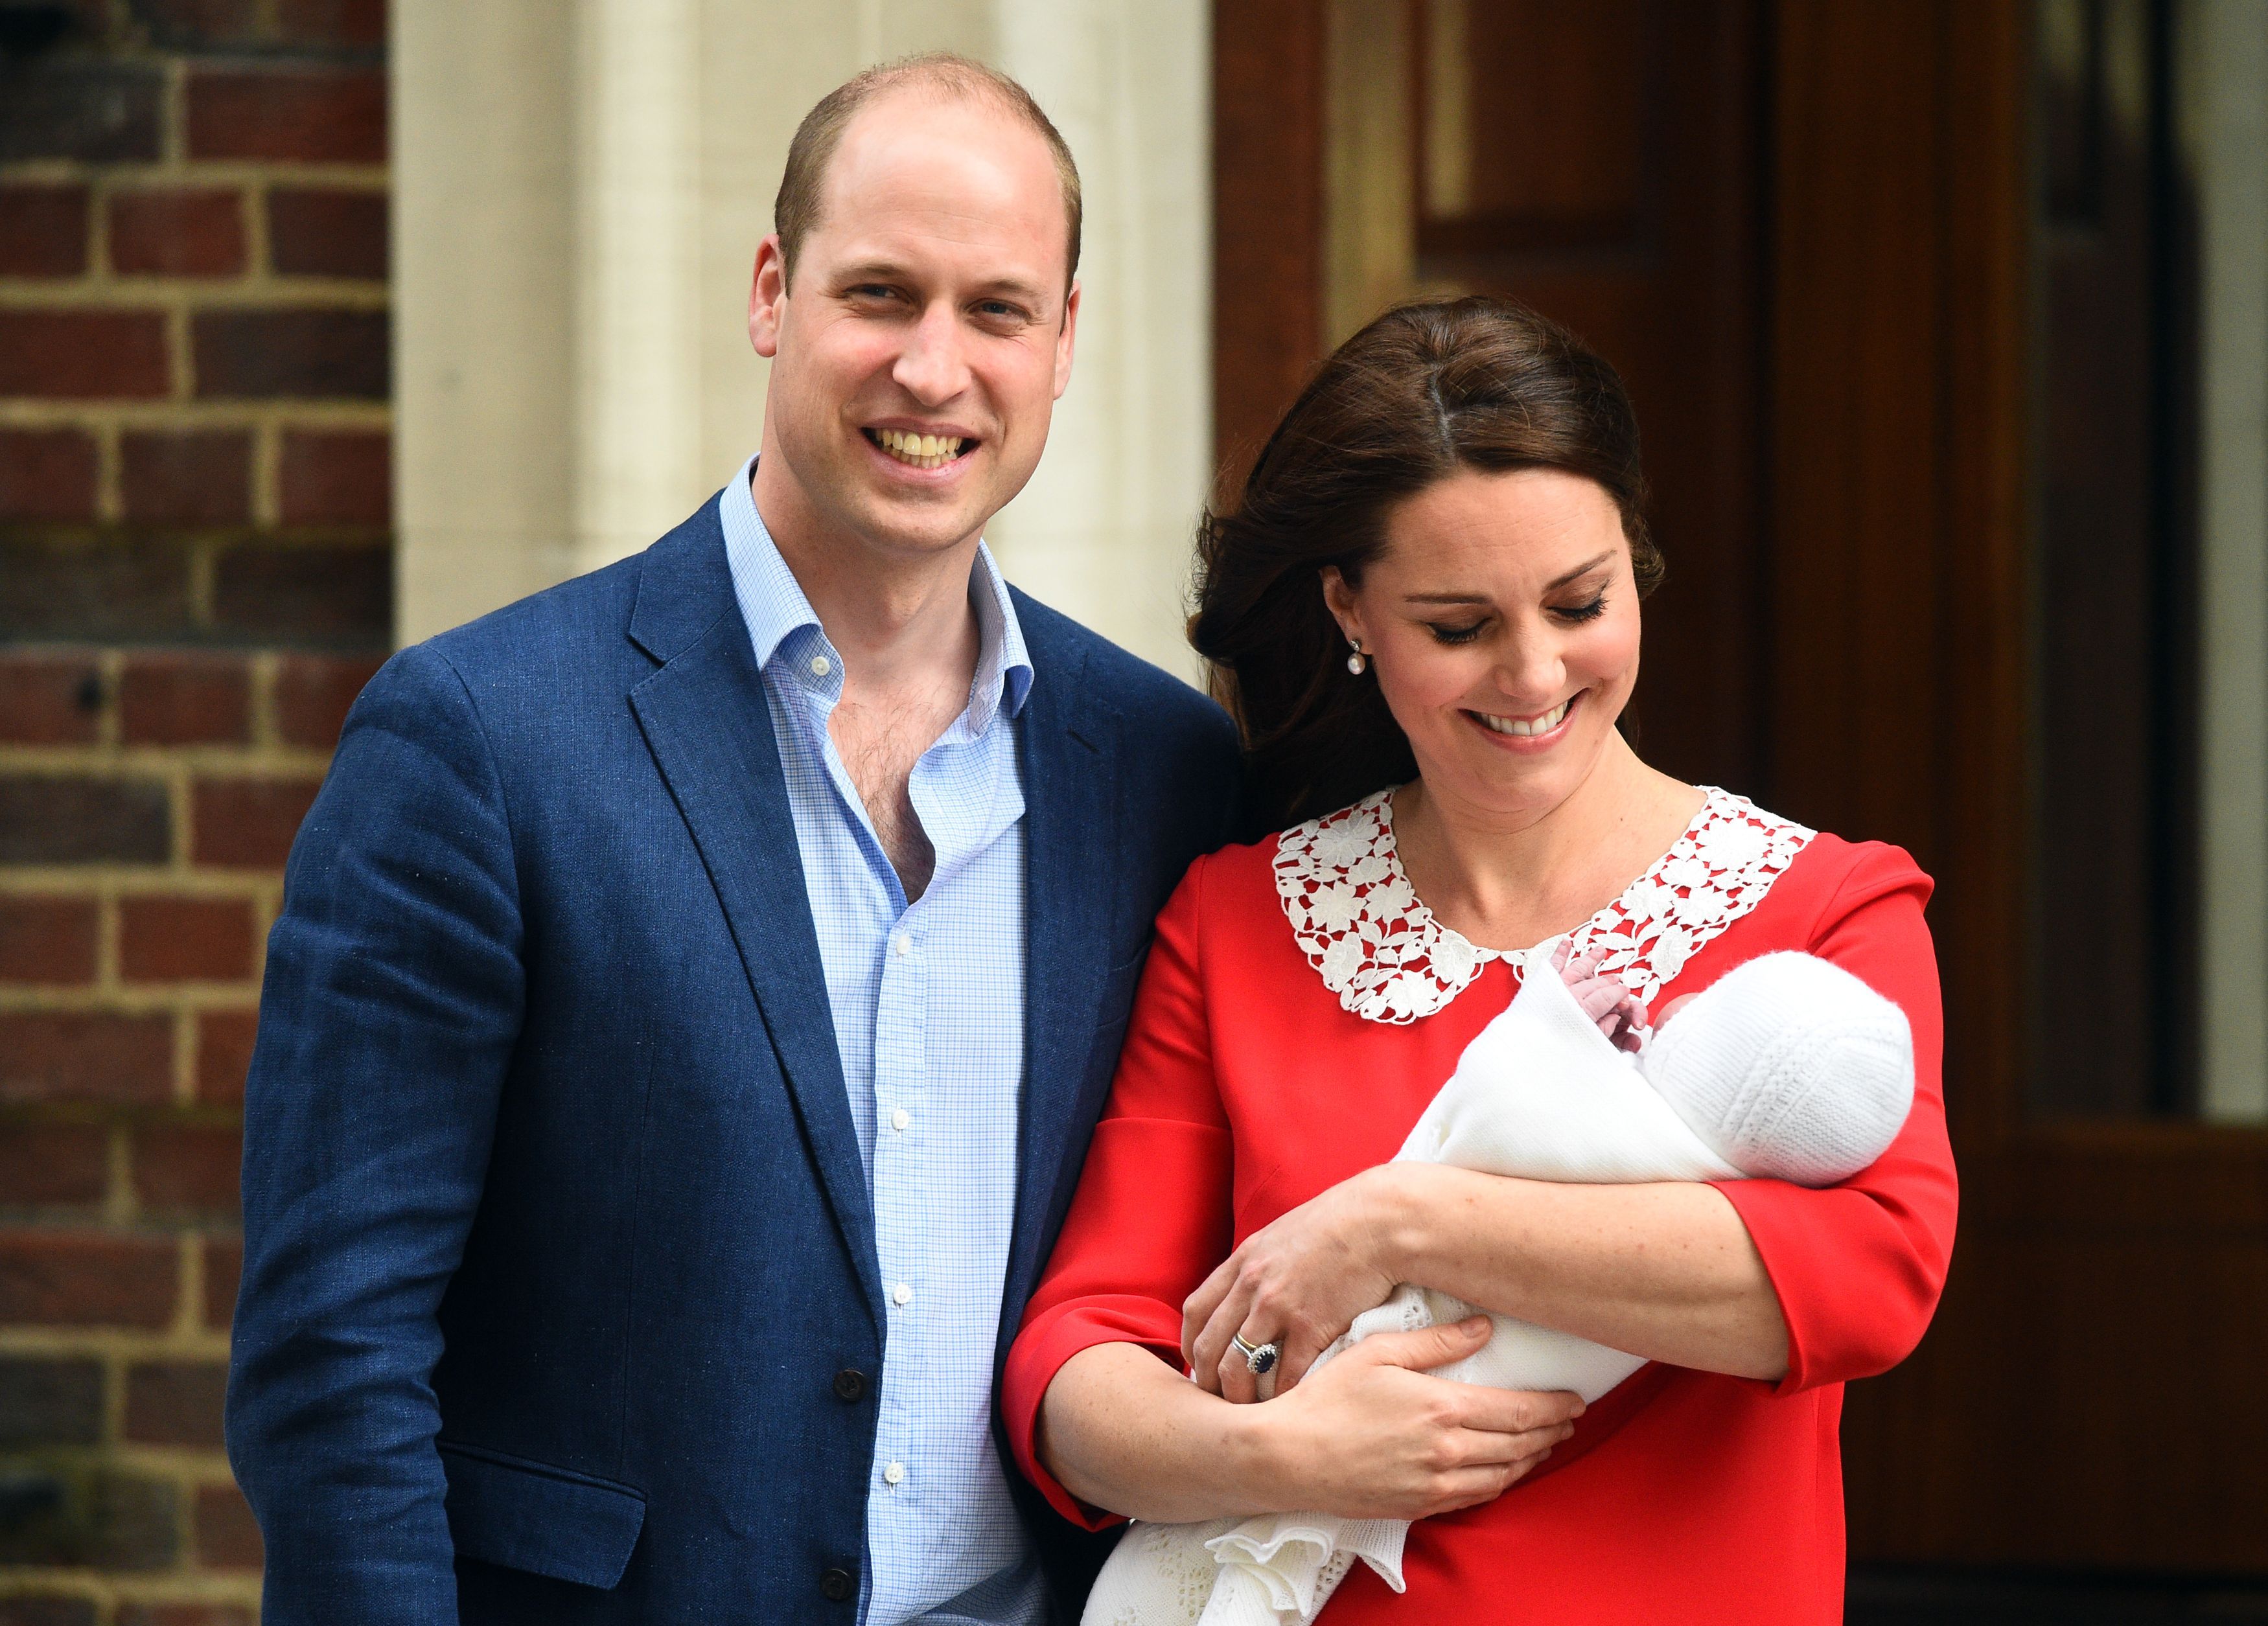 The Duke and Duchess of Cambridge and their newborn son. (Kirsty O'Connor - PA Images—PA Images via Getty Images)